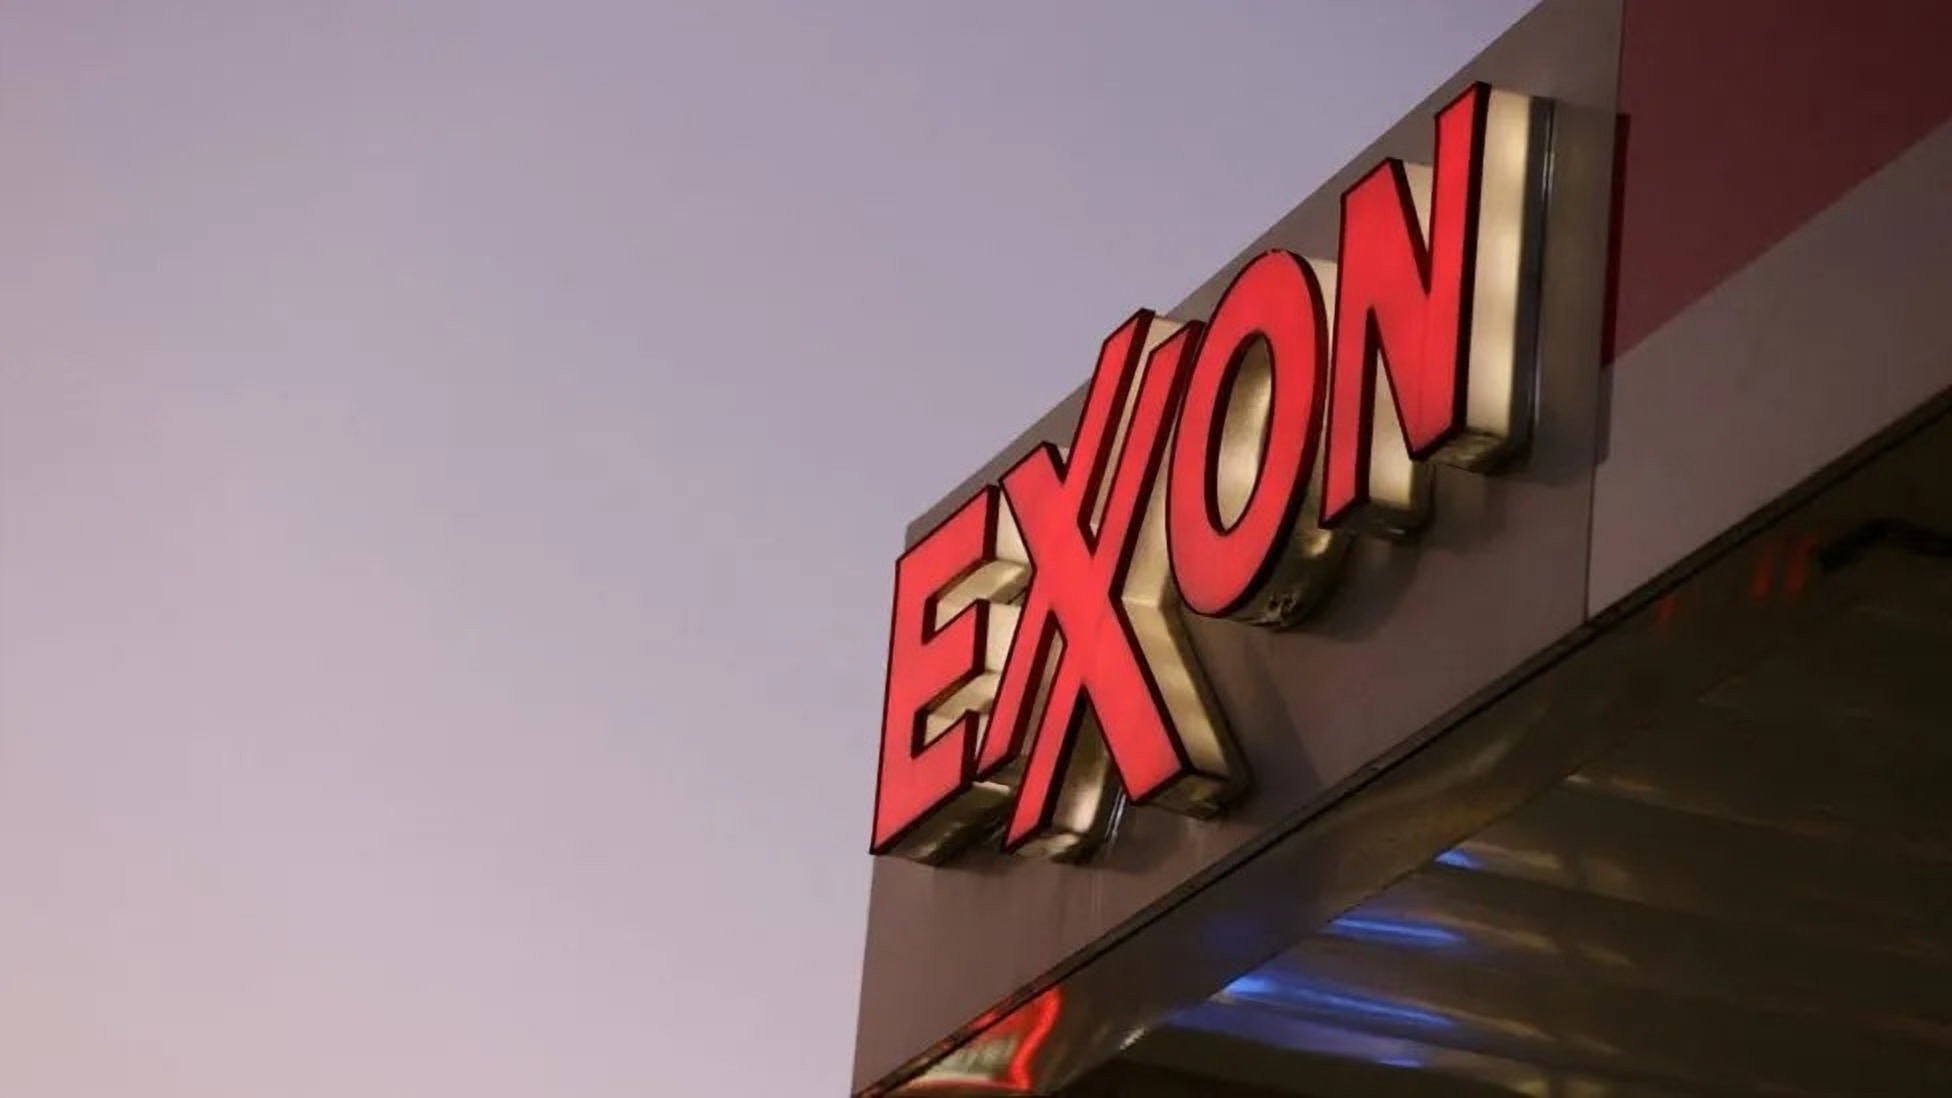 Exxon Sues Investors to Silence Climate Proposal 